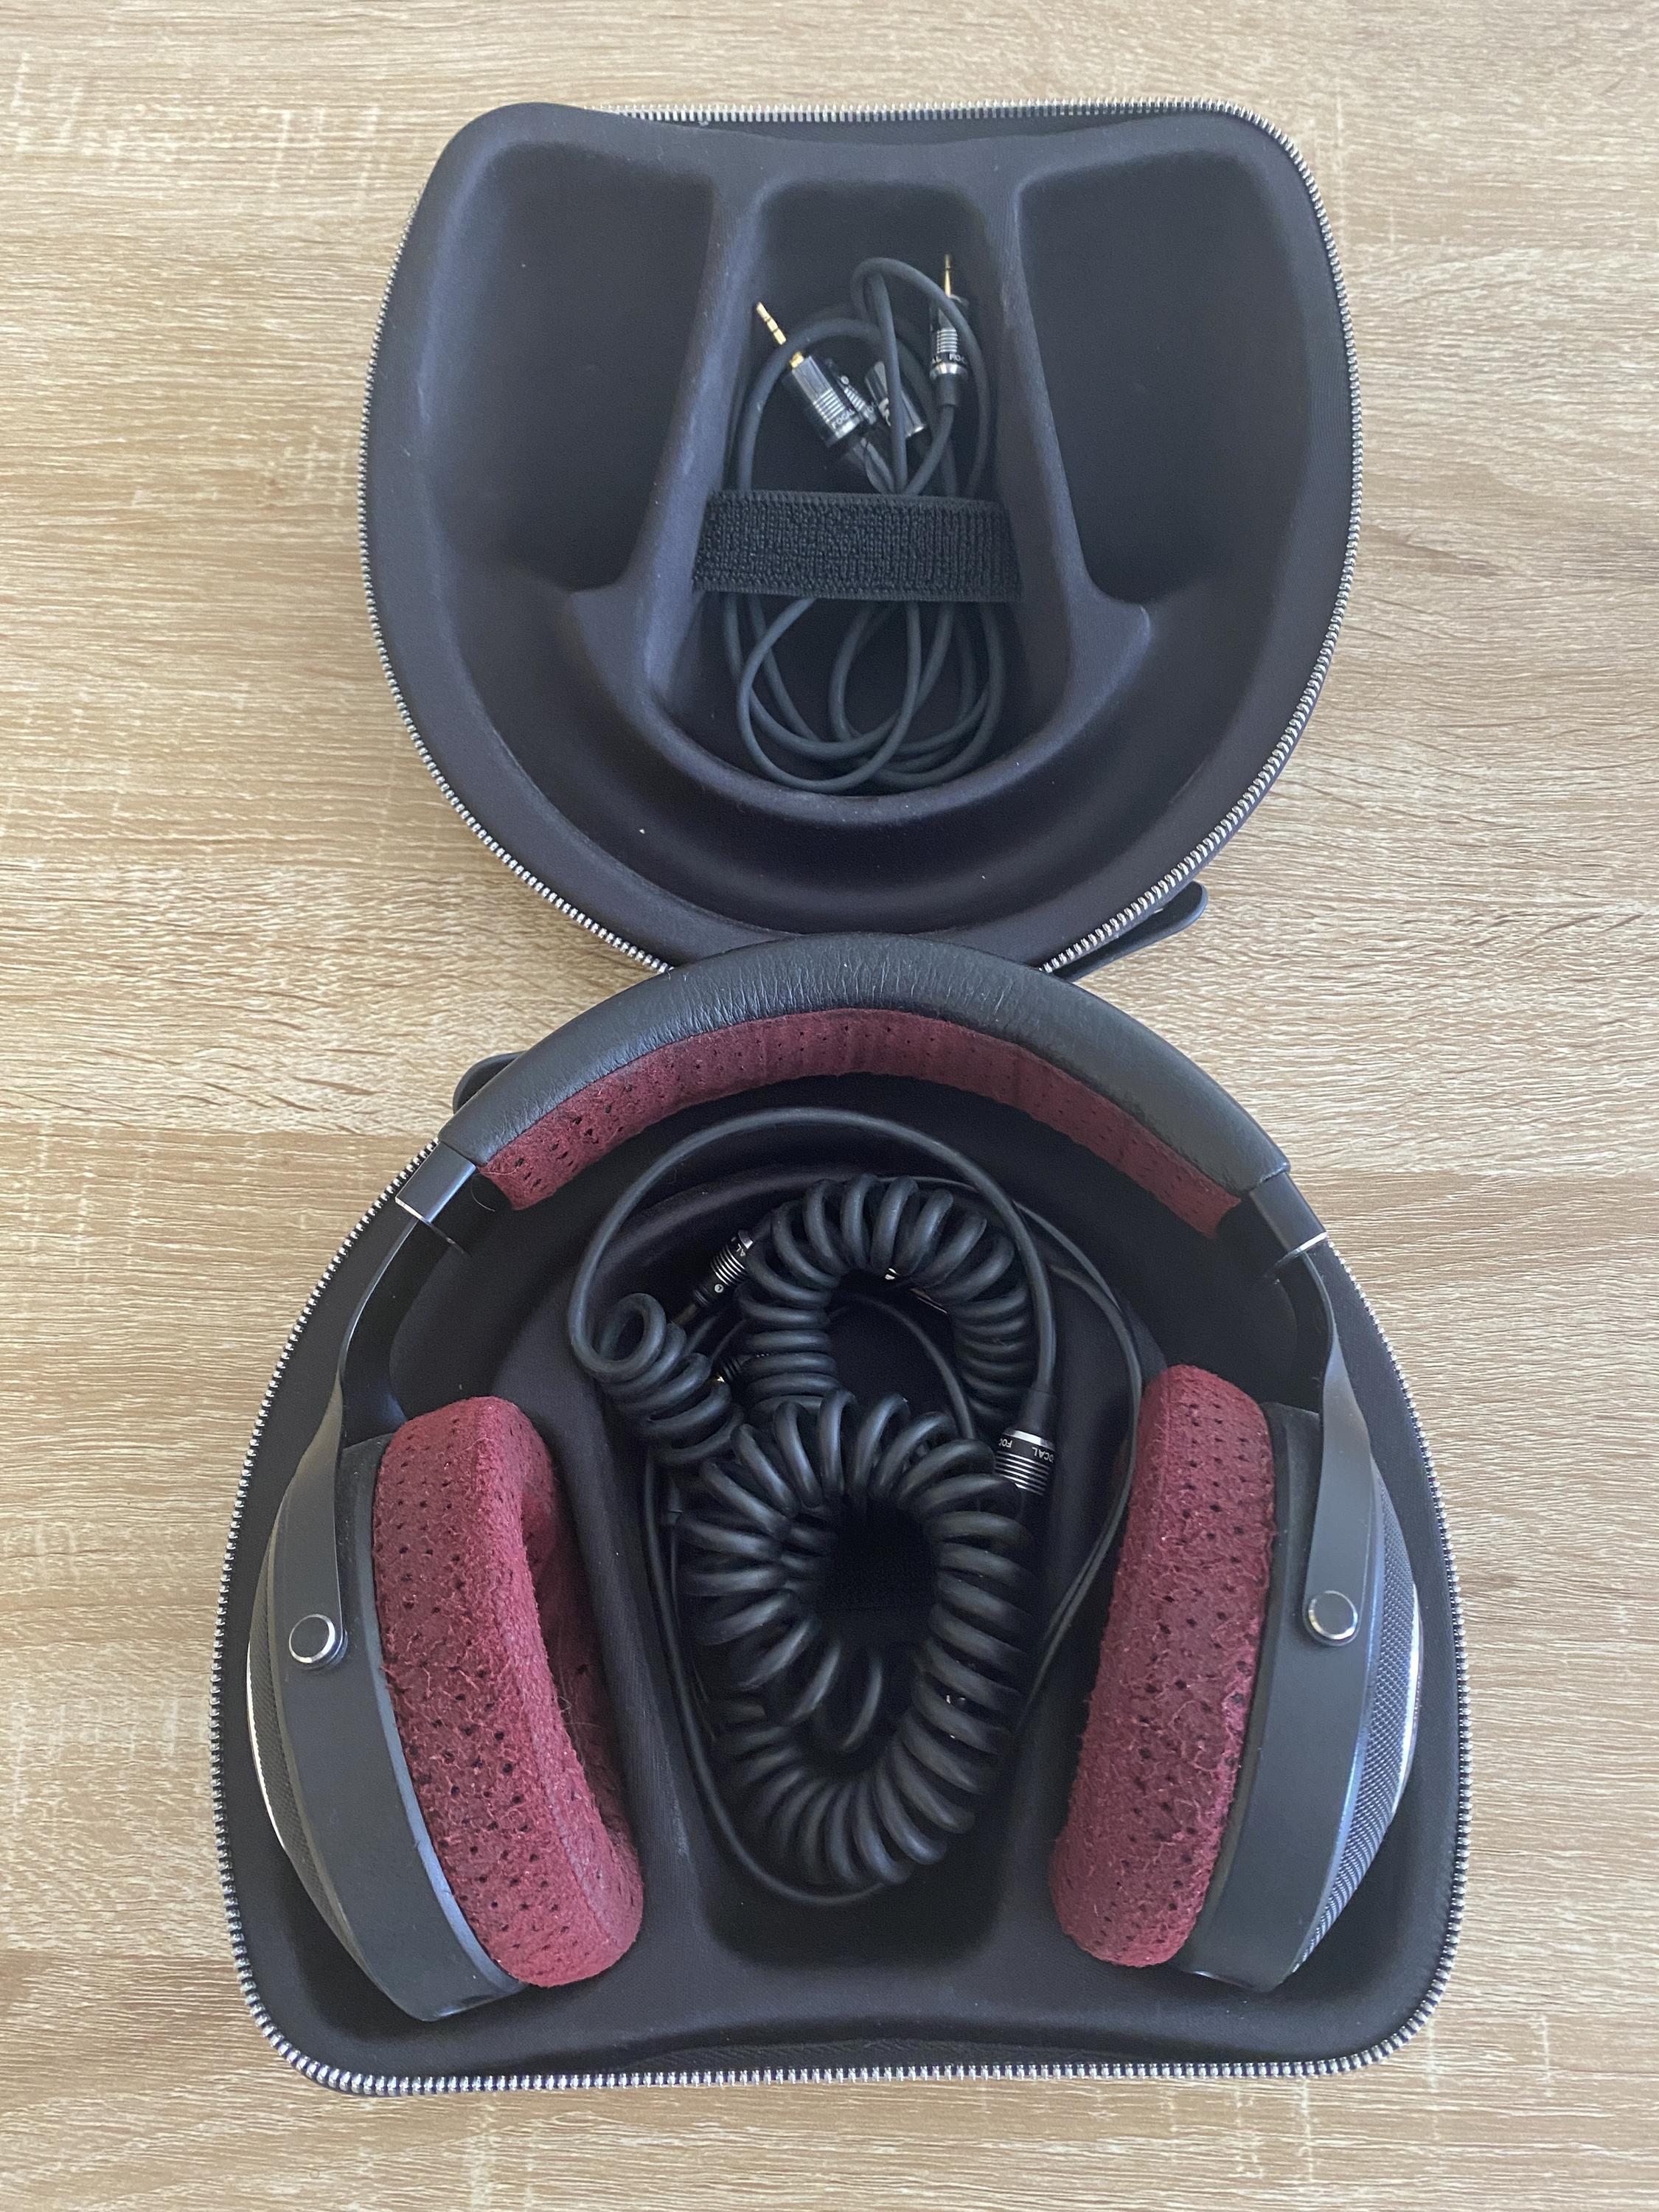 Used Focal Clear Professional Open-back Reference Studio Headphones